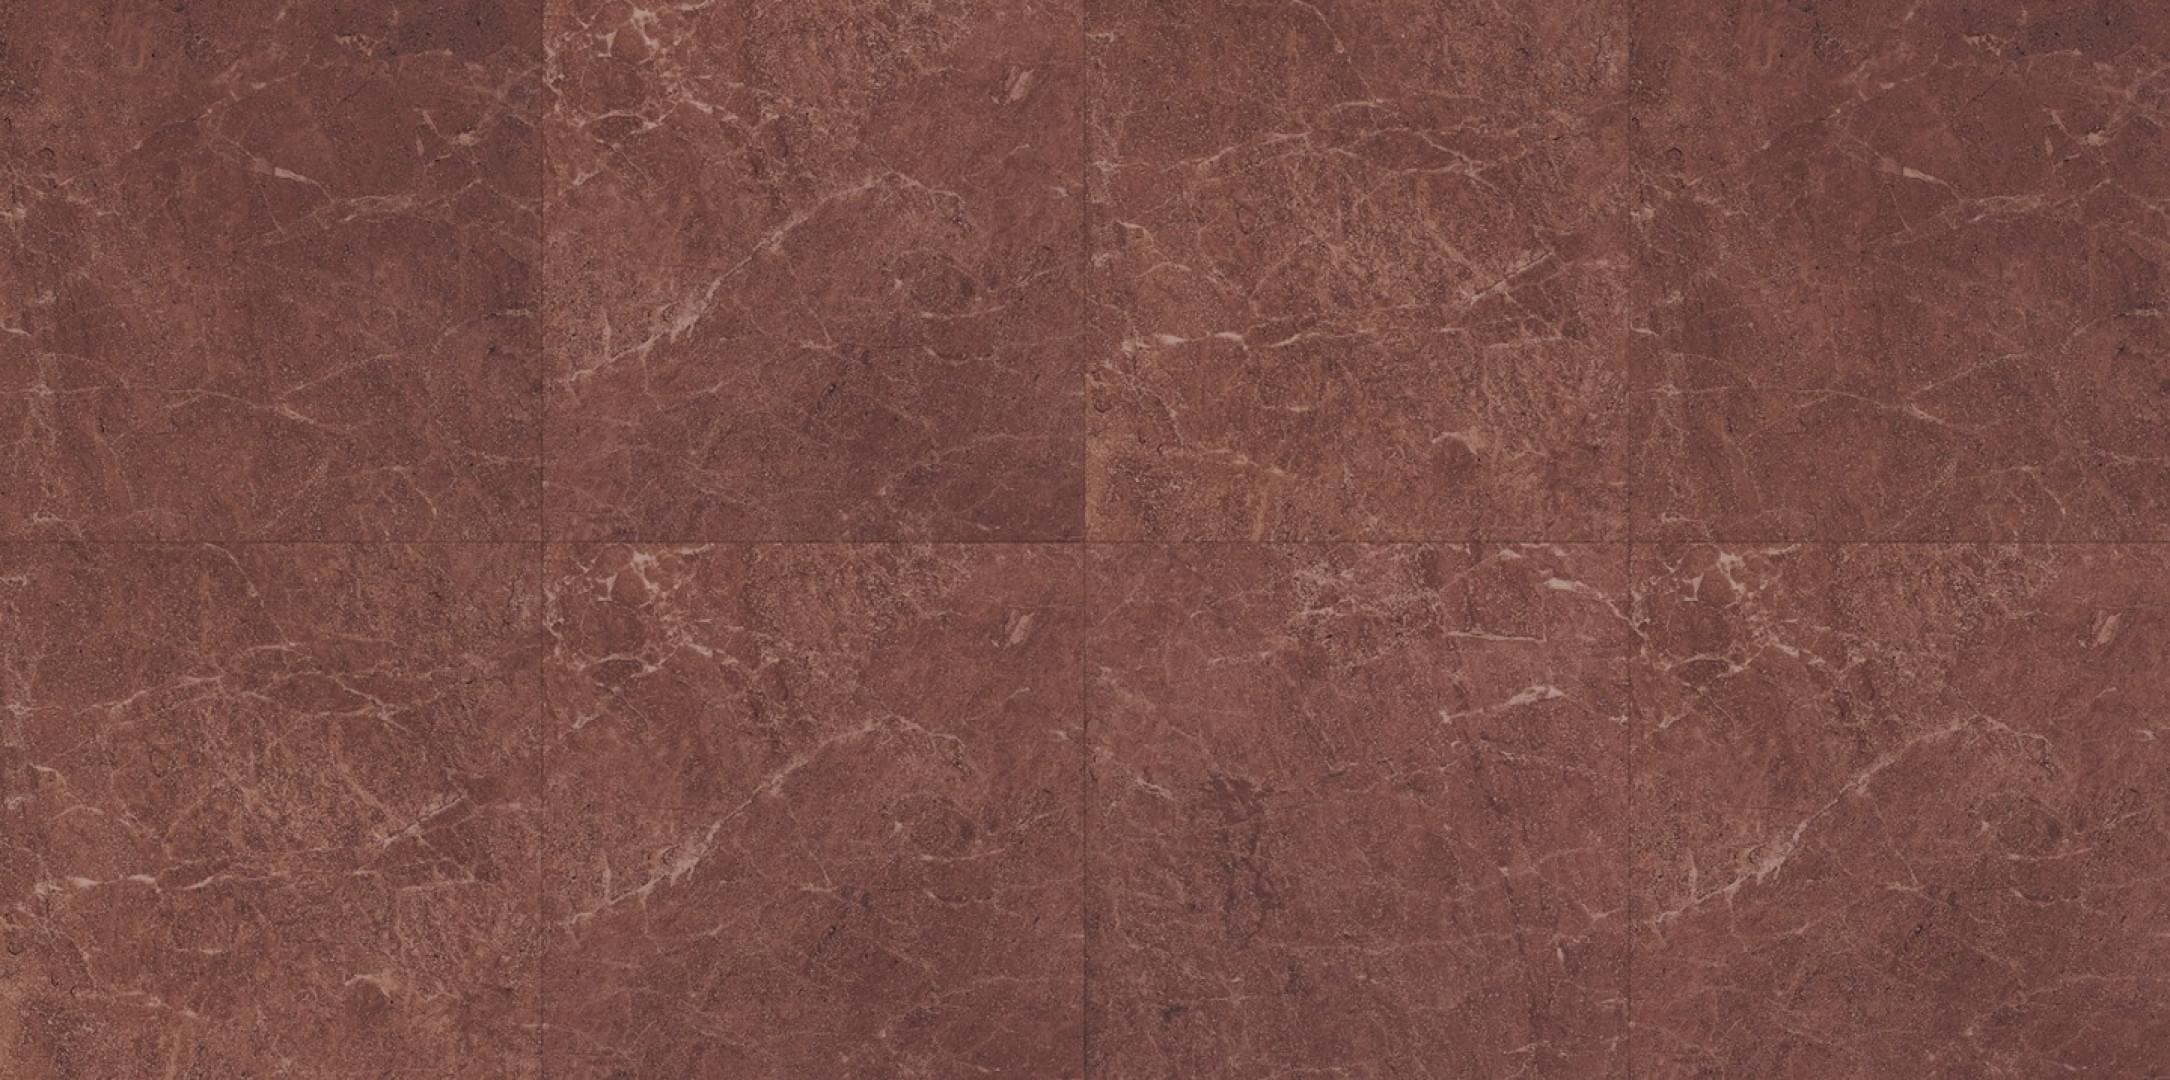 PT-S 7272 Tenesse Red Marble from Hyundai Flooring